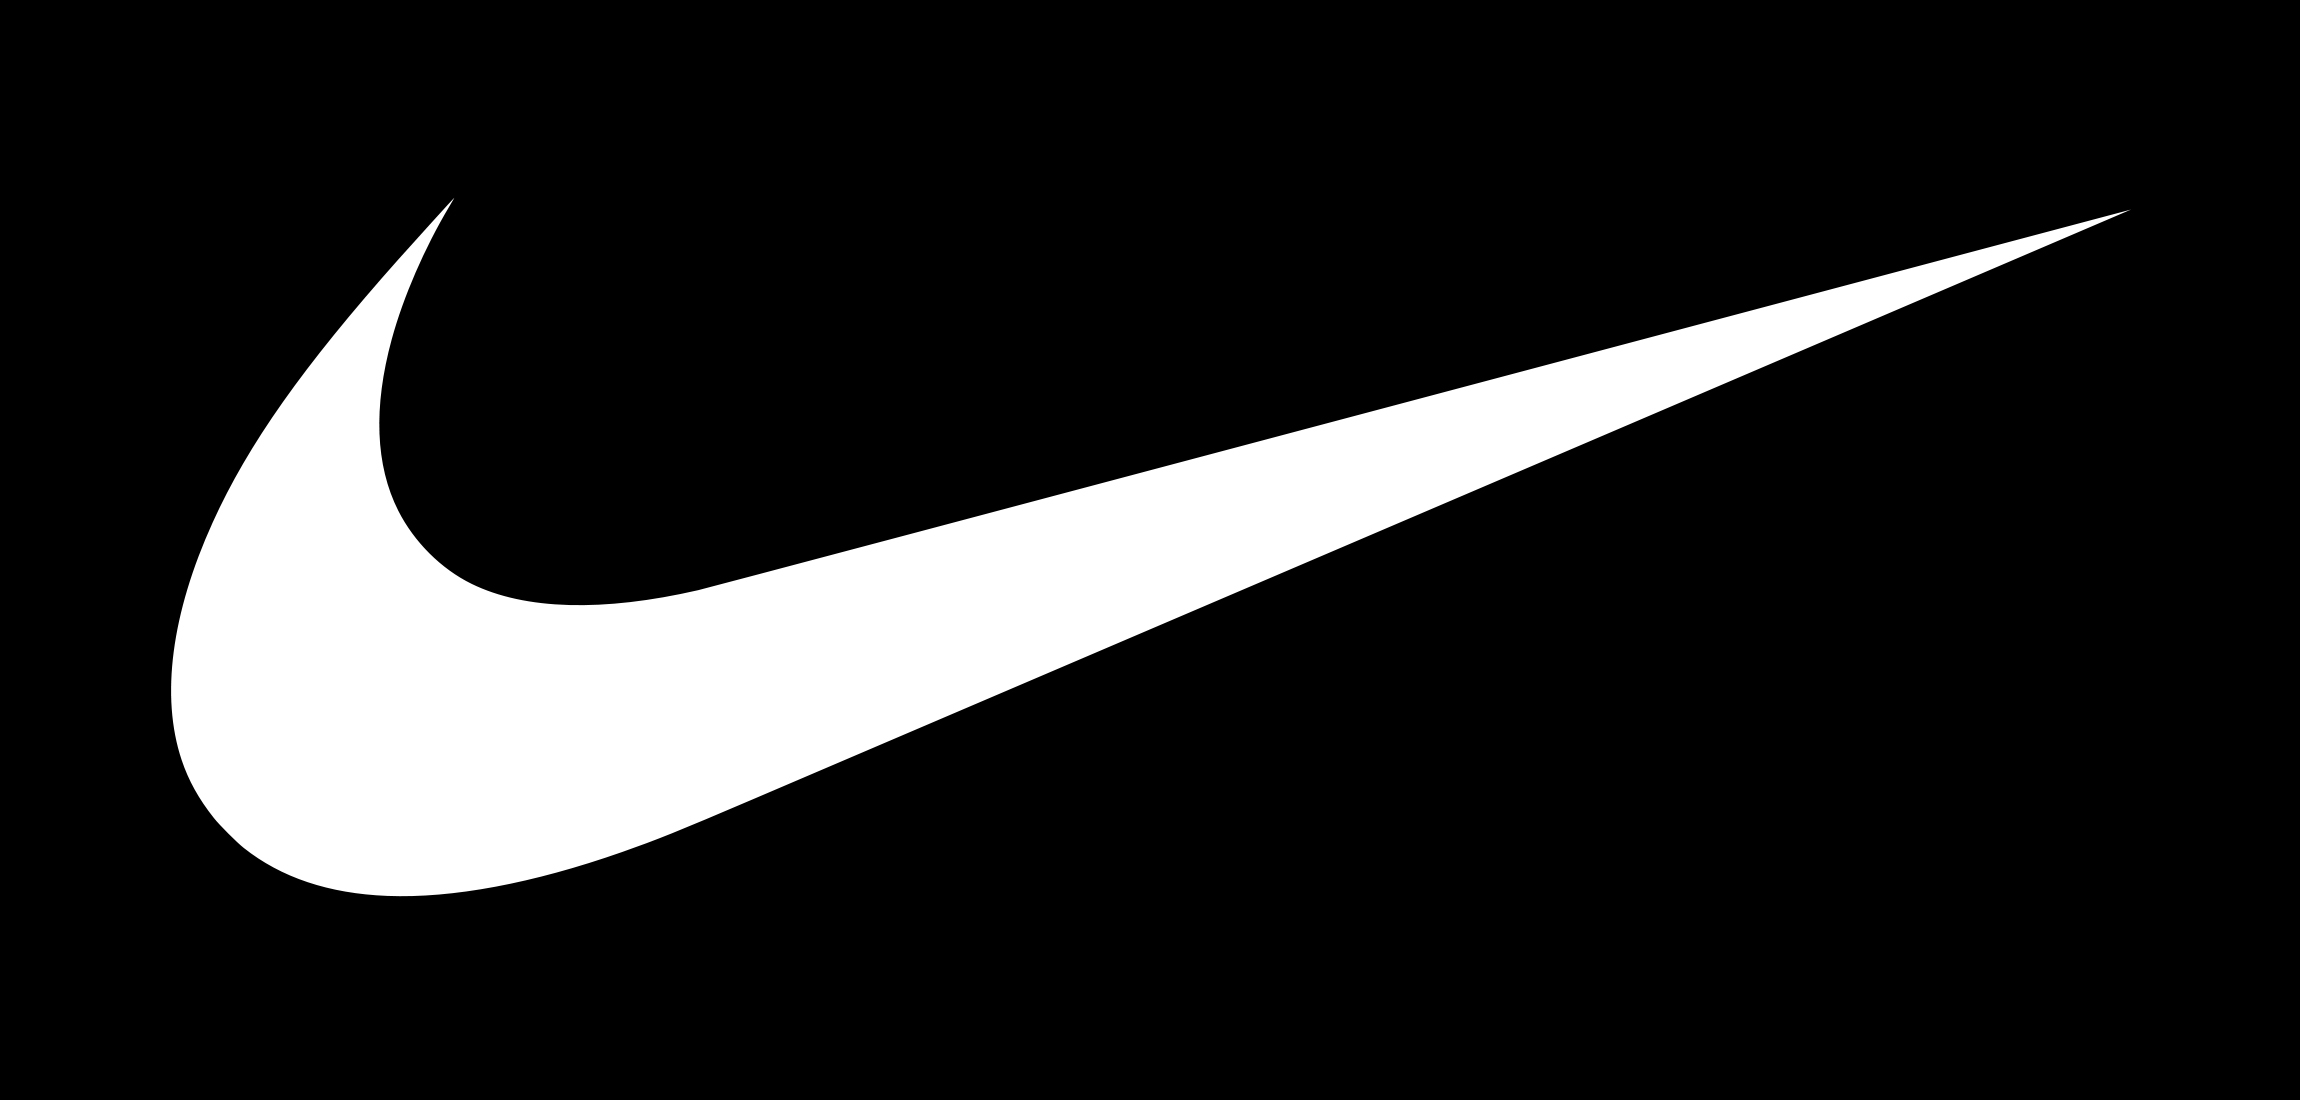 Nike Legal To Work With Branding Digital